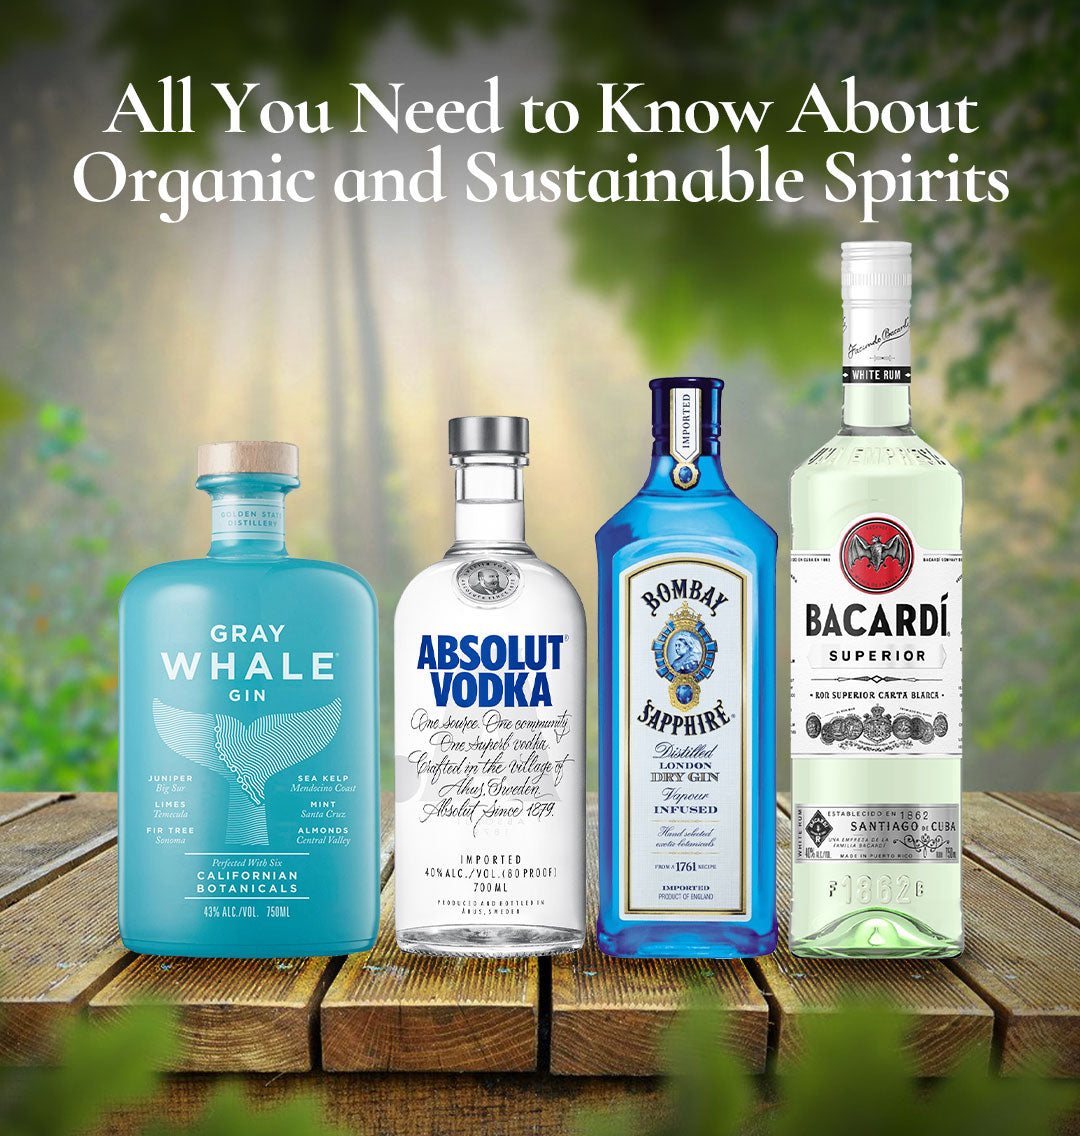 All You Need to Know About Organic and Sustainable Spirits